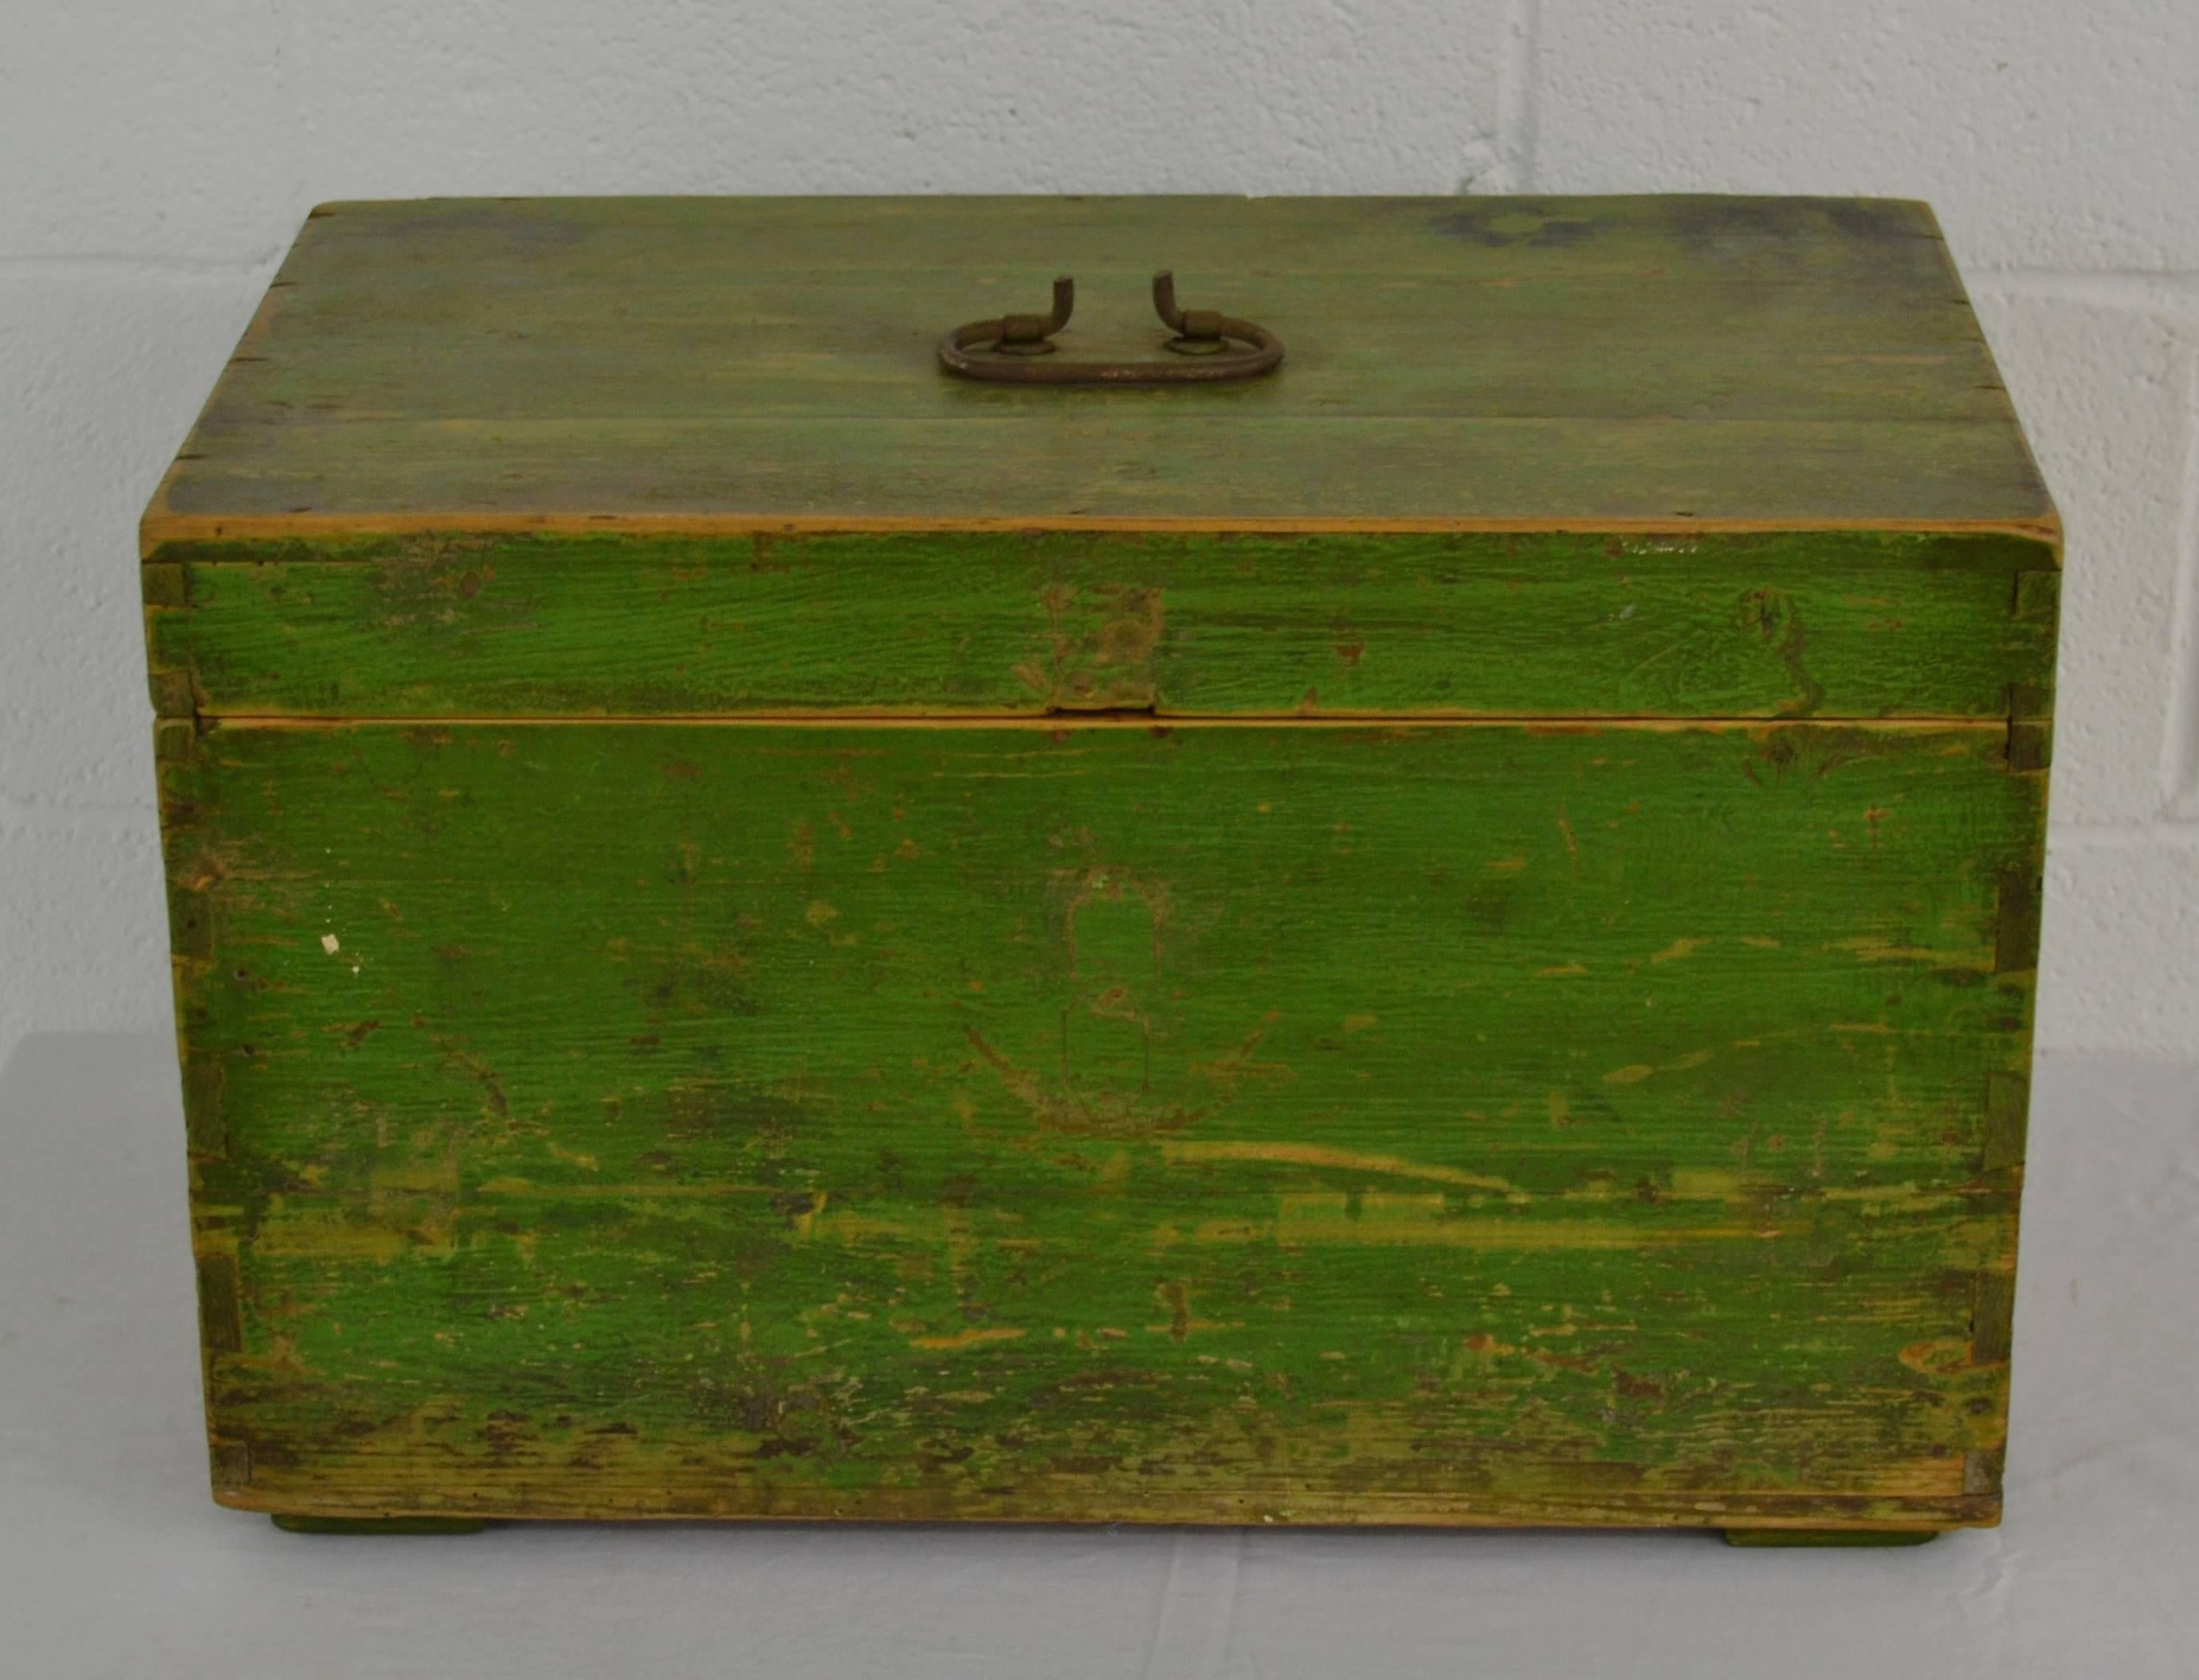 A vintage pine dovetailed army box with a wrought iron handle. In old green paint.